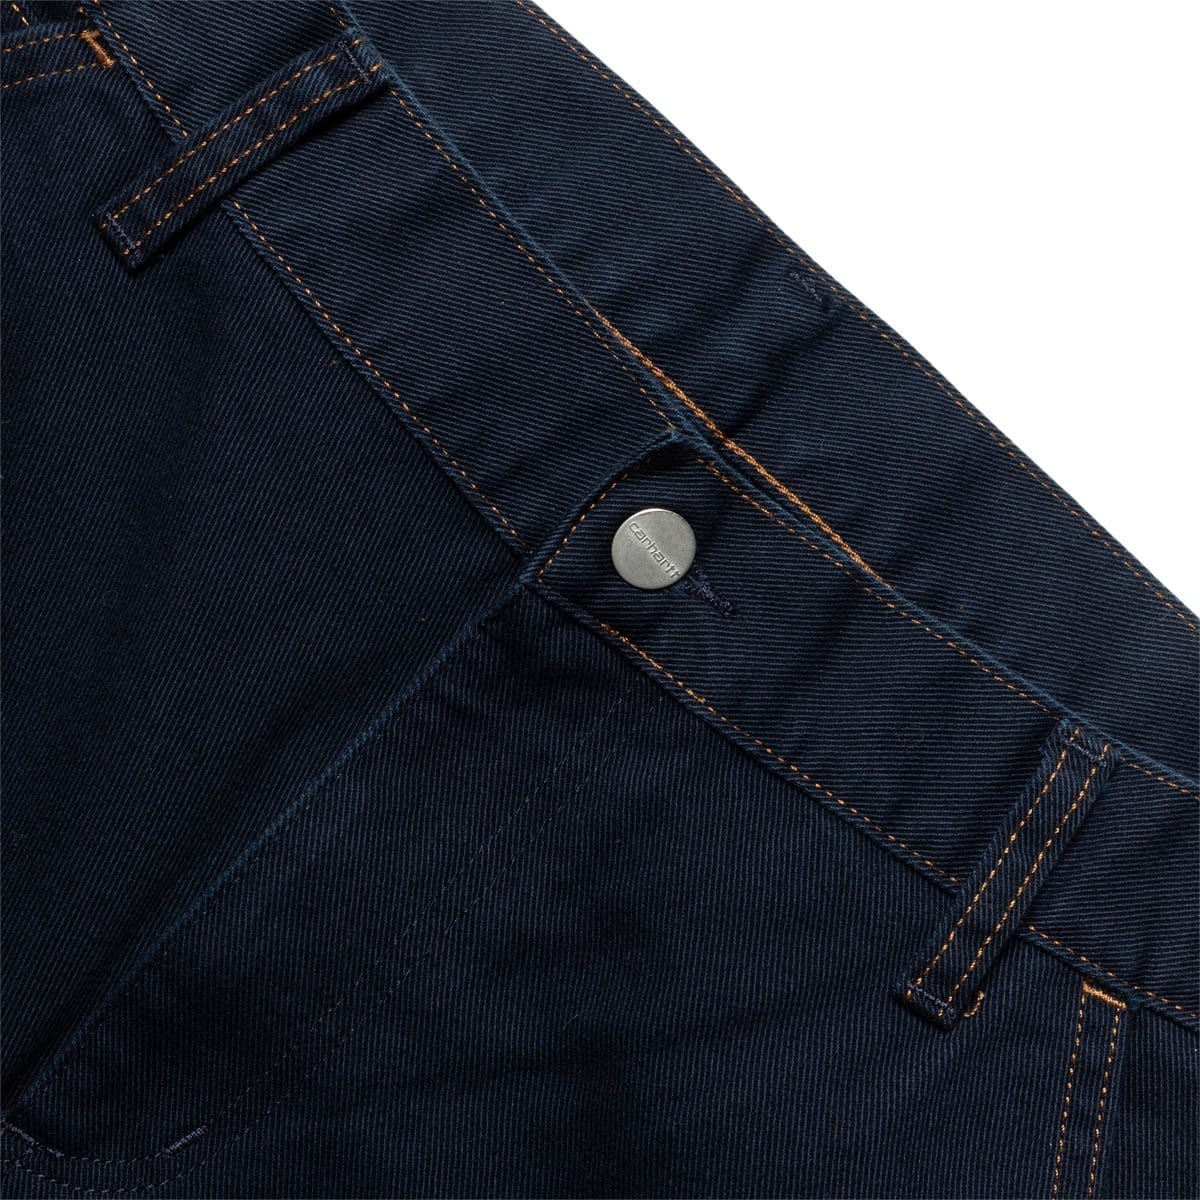 Carhartt WIP Bottoms DOUBLE FRONT PANT